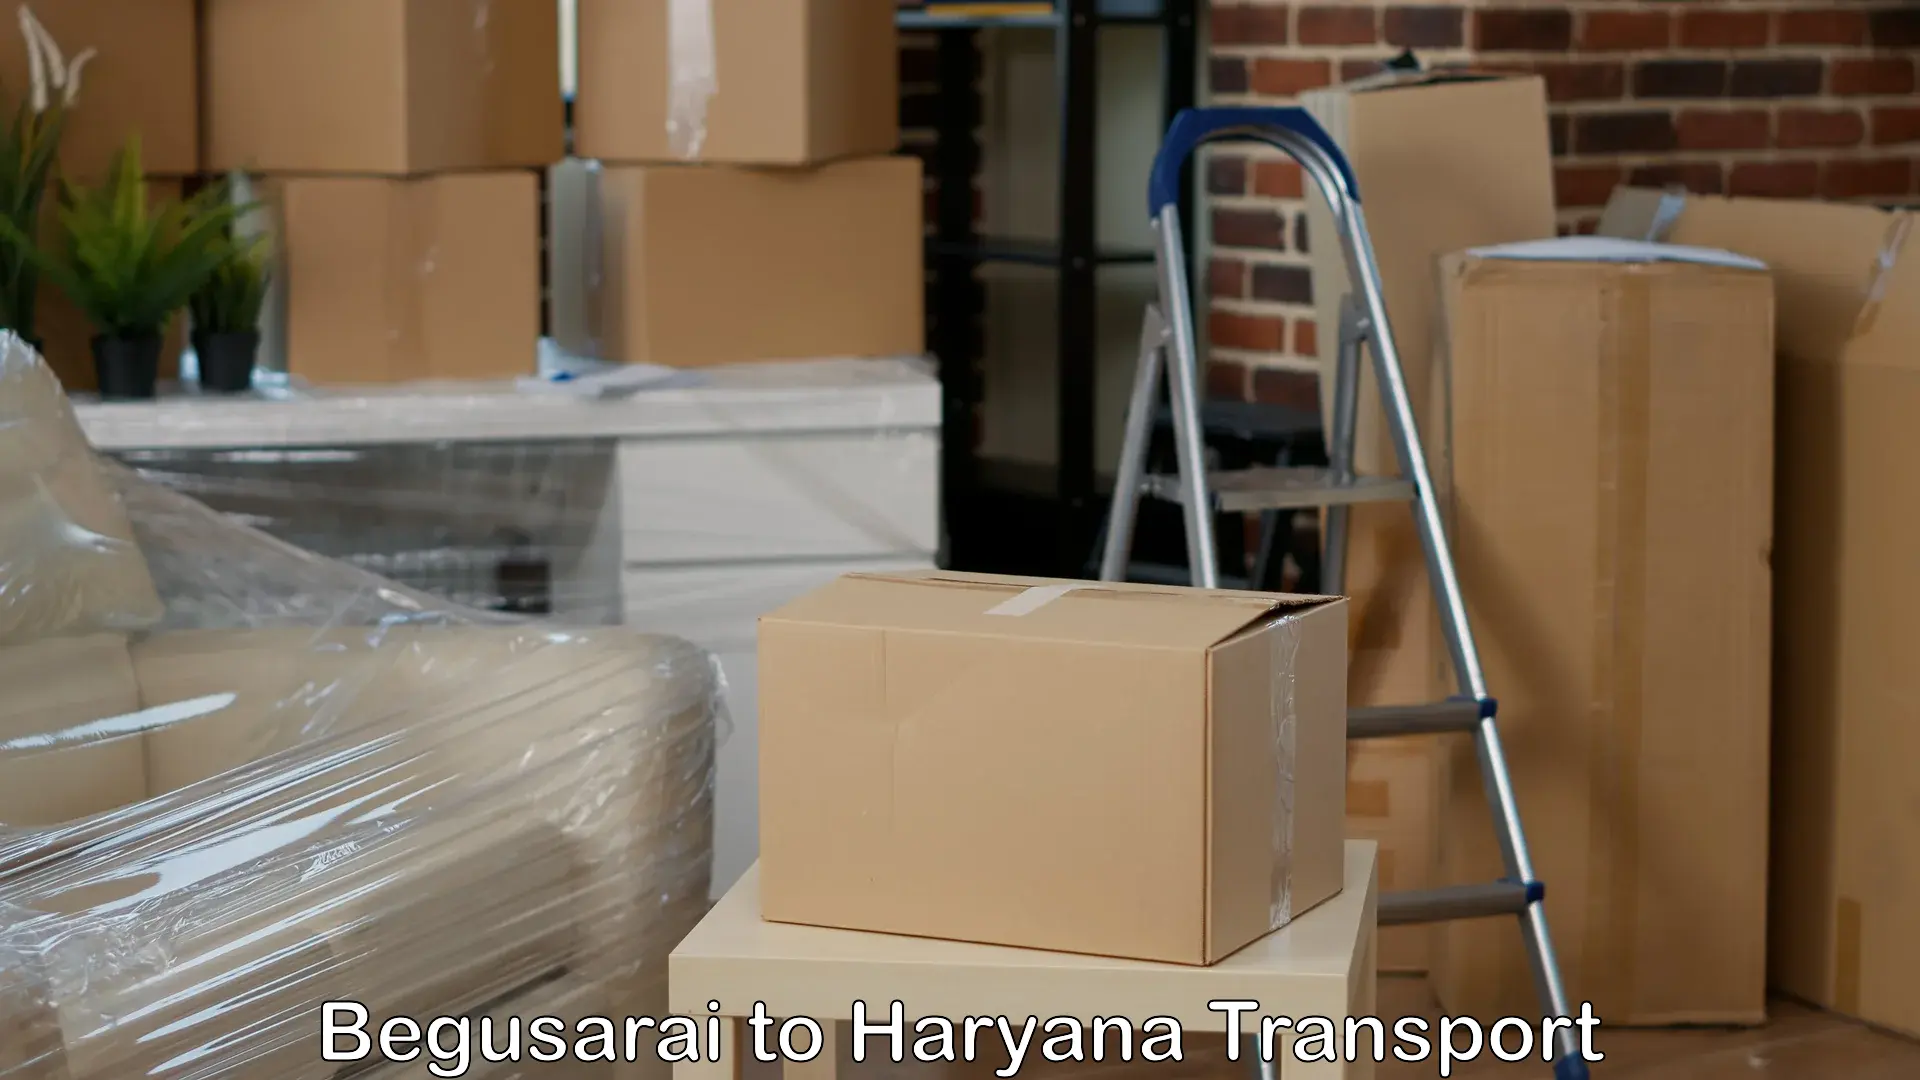 Truck transport companies in India in Begusarai to Sirsa